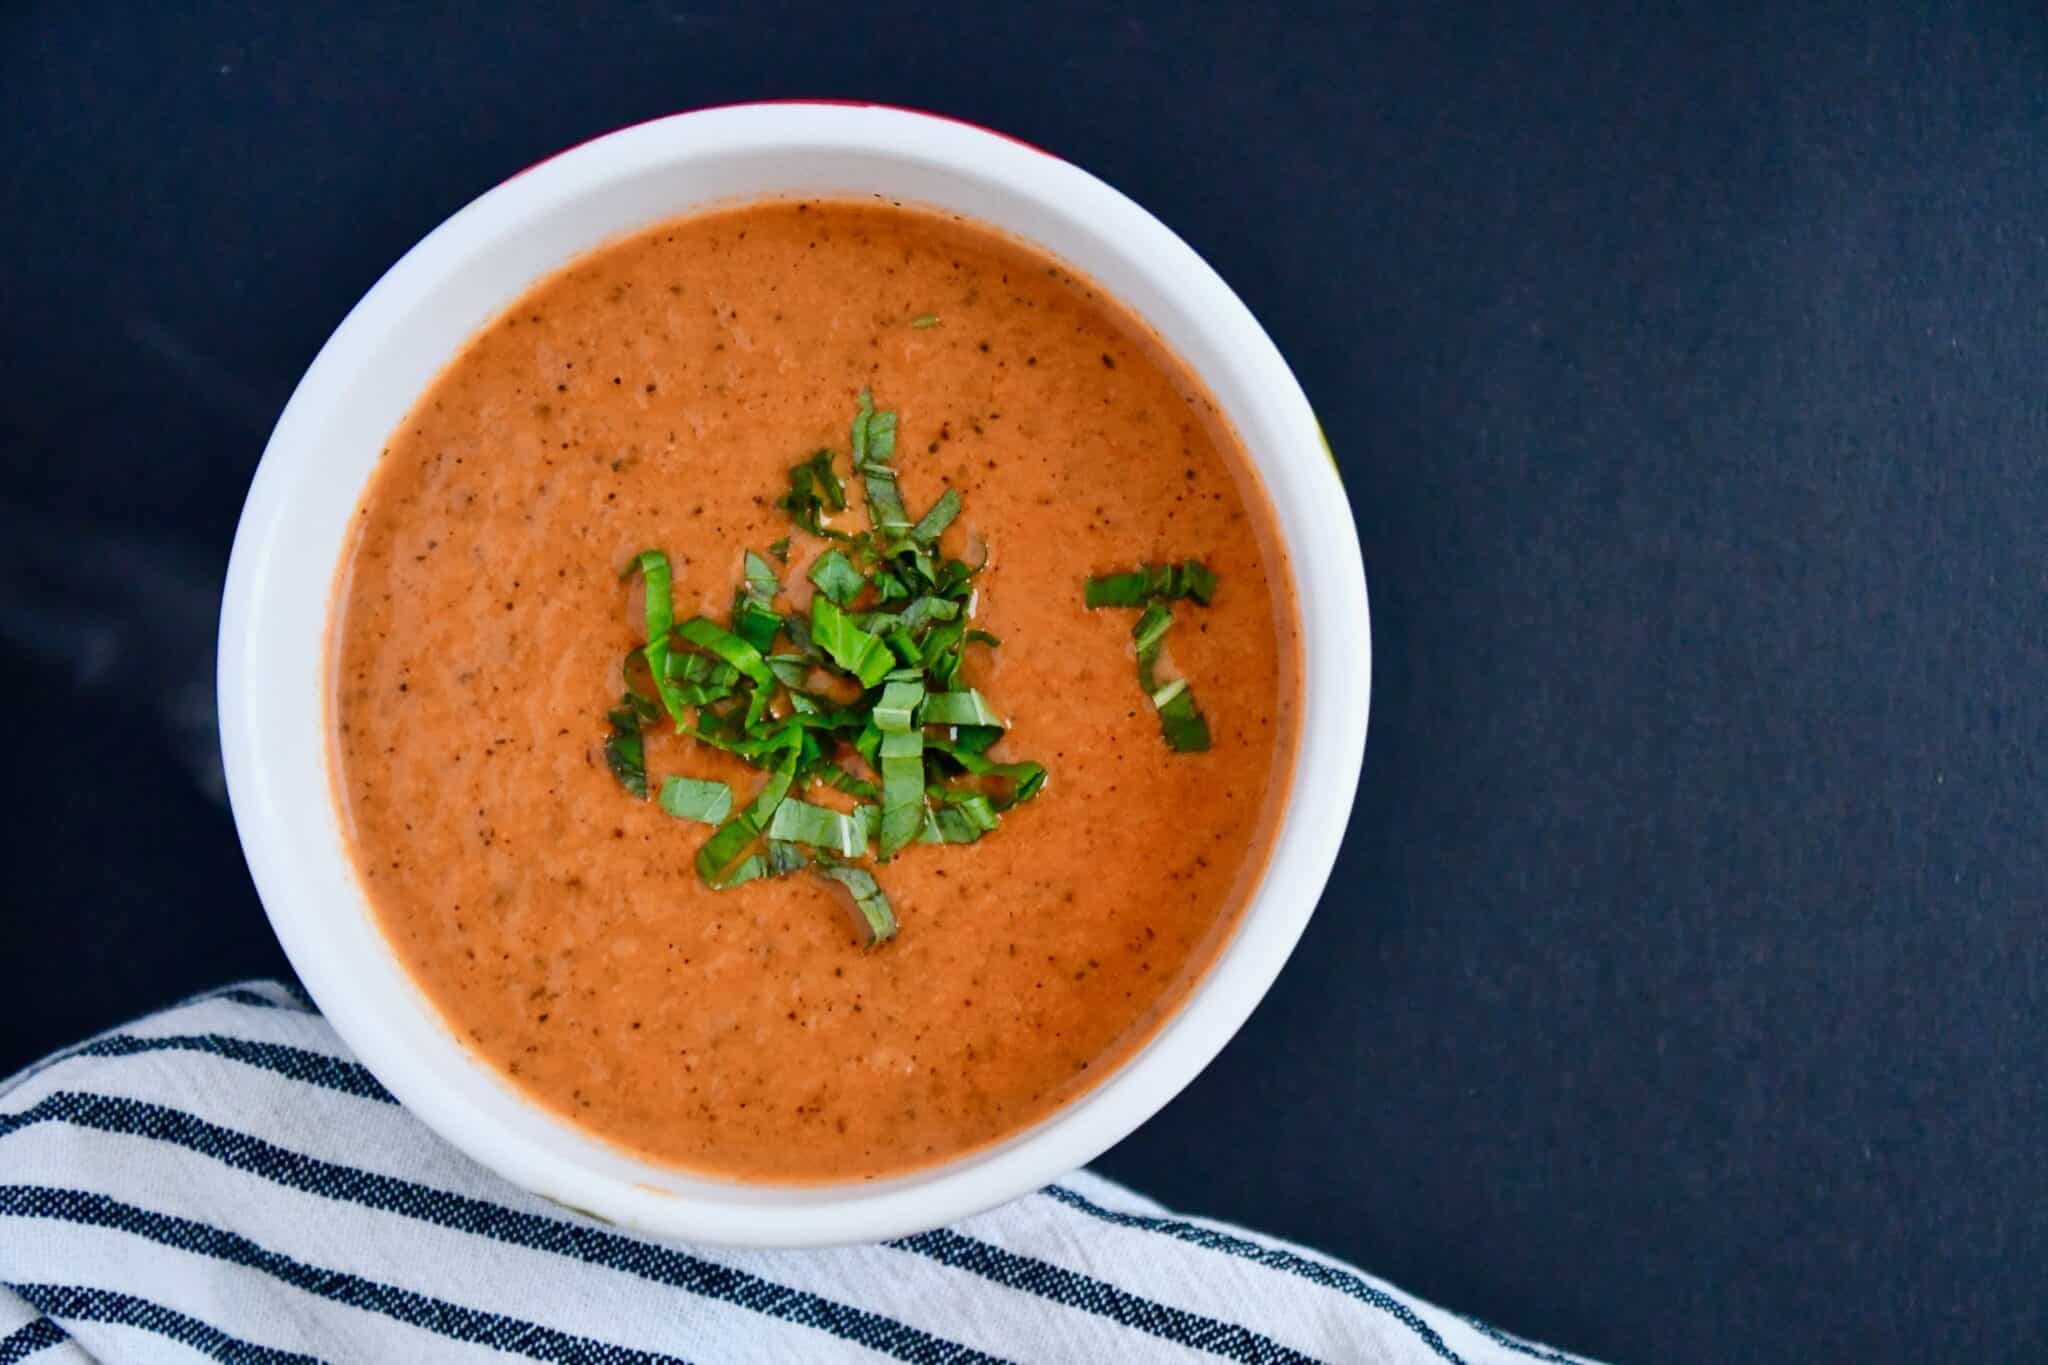 Joanna Gaines Tomato Basil Soup from the Magnolia Table Cookbook Vol. 1, prepared by KendellKreations.com